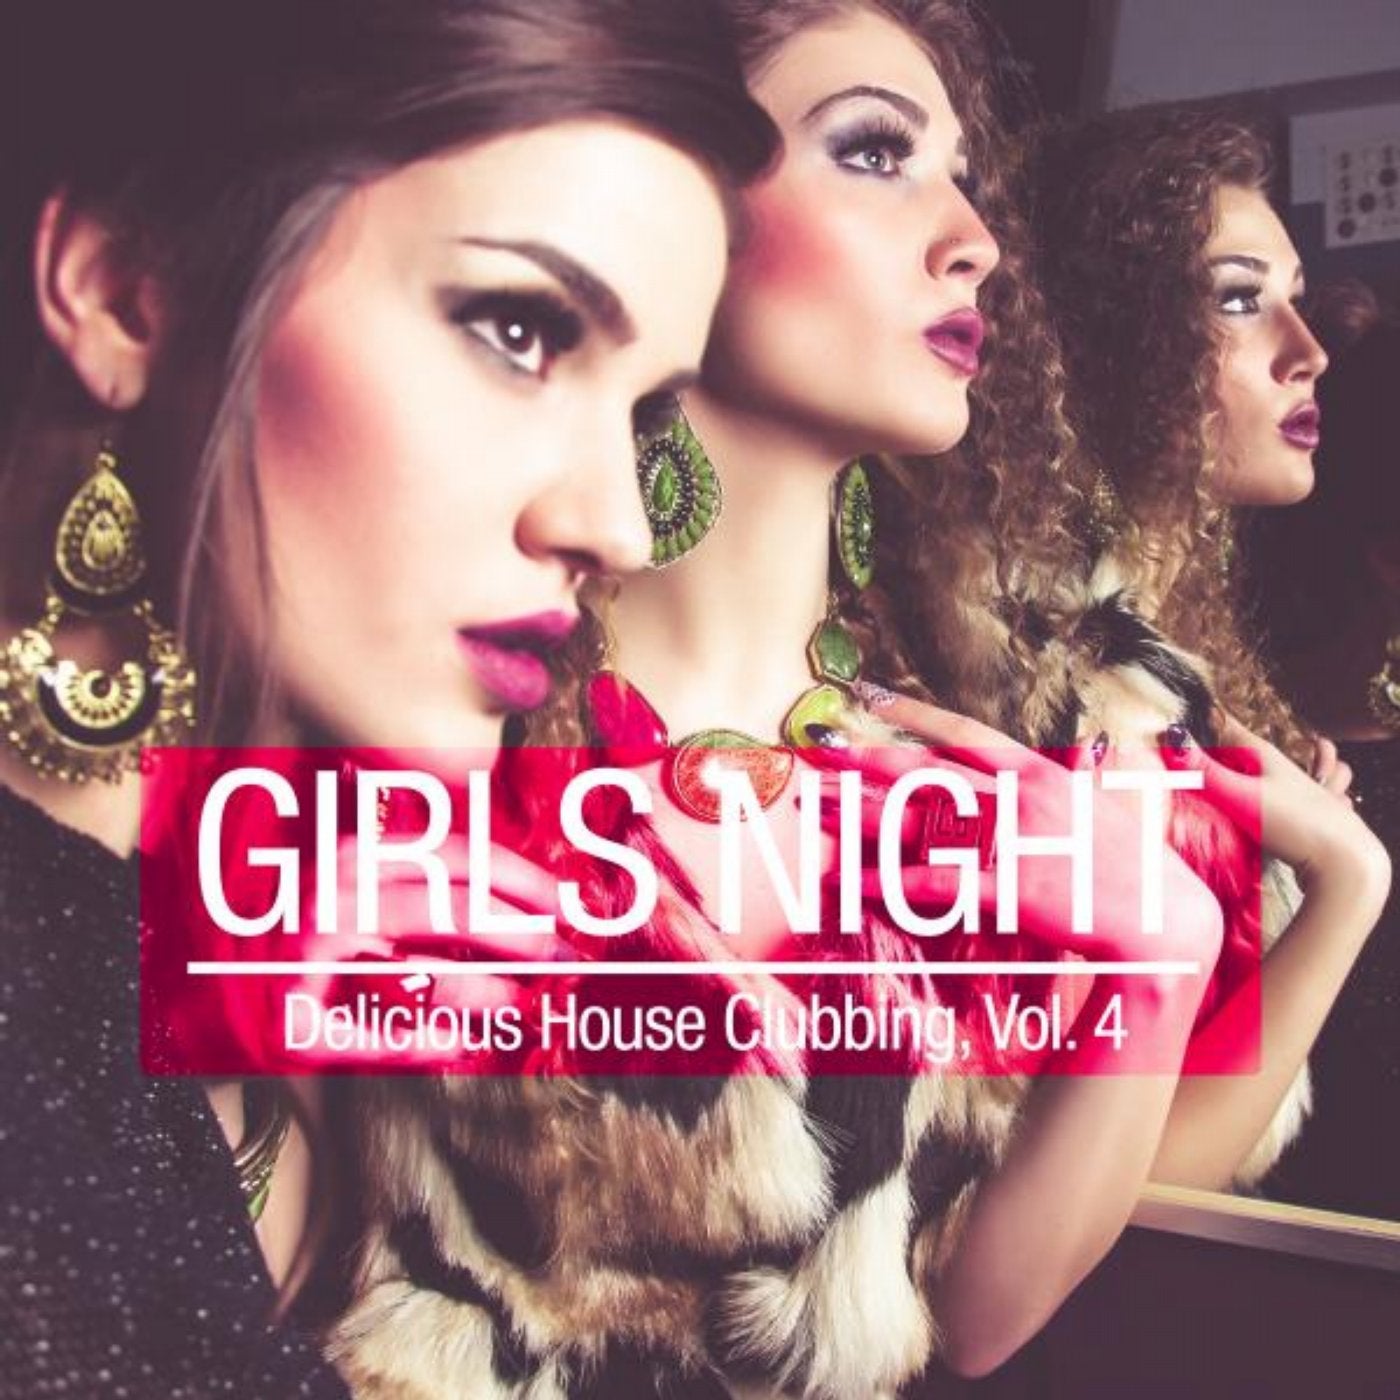 Girls Night - Delicious House Clubbing, Vol. 4